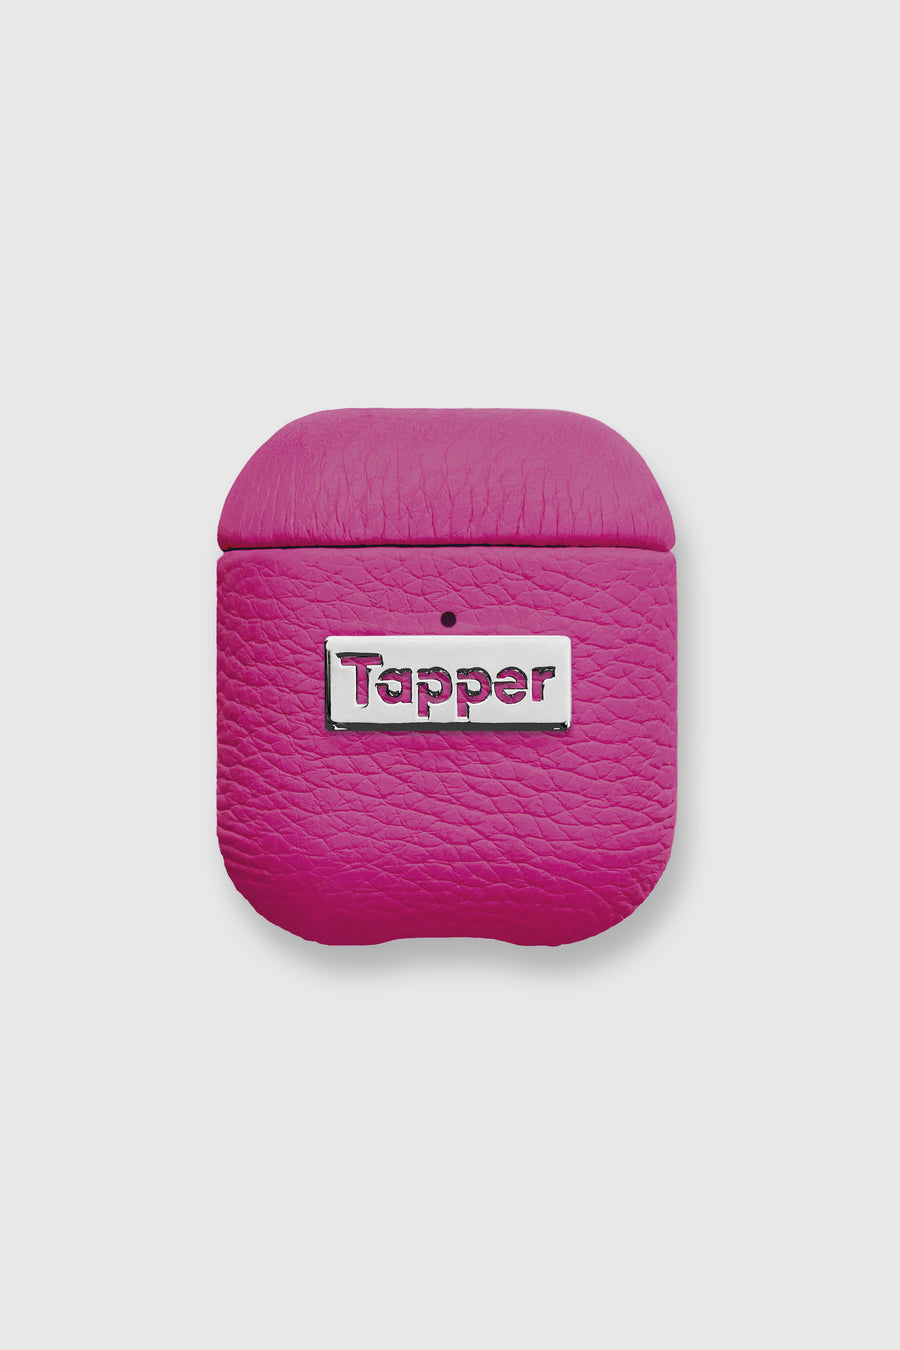 Tapper's luxurious hot pink genuine lamb leather AirPods case protects and elevates the look of your AirPods. The luxurious, protective case for AirPods with a metal logo plate colored in silver steps up your AirPods game. The next must-have high end protective Apple AirPods accessory in bright pink real leather and metal details. Compatible with AirPods (1st and 2nd generation). Designed in Sweden by Tapper. Free Express Shipping at gettapper.com